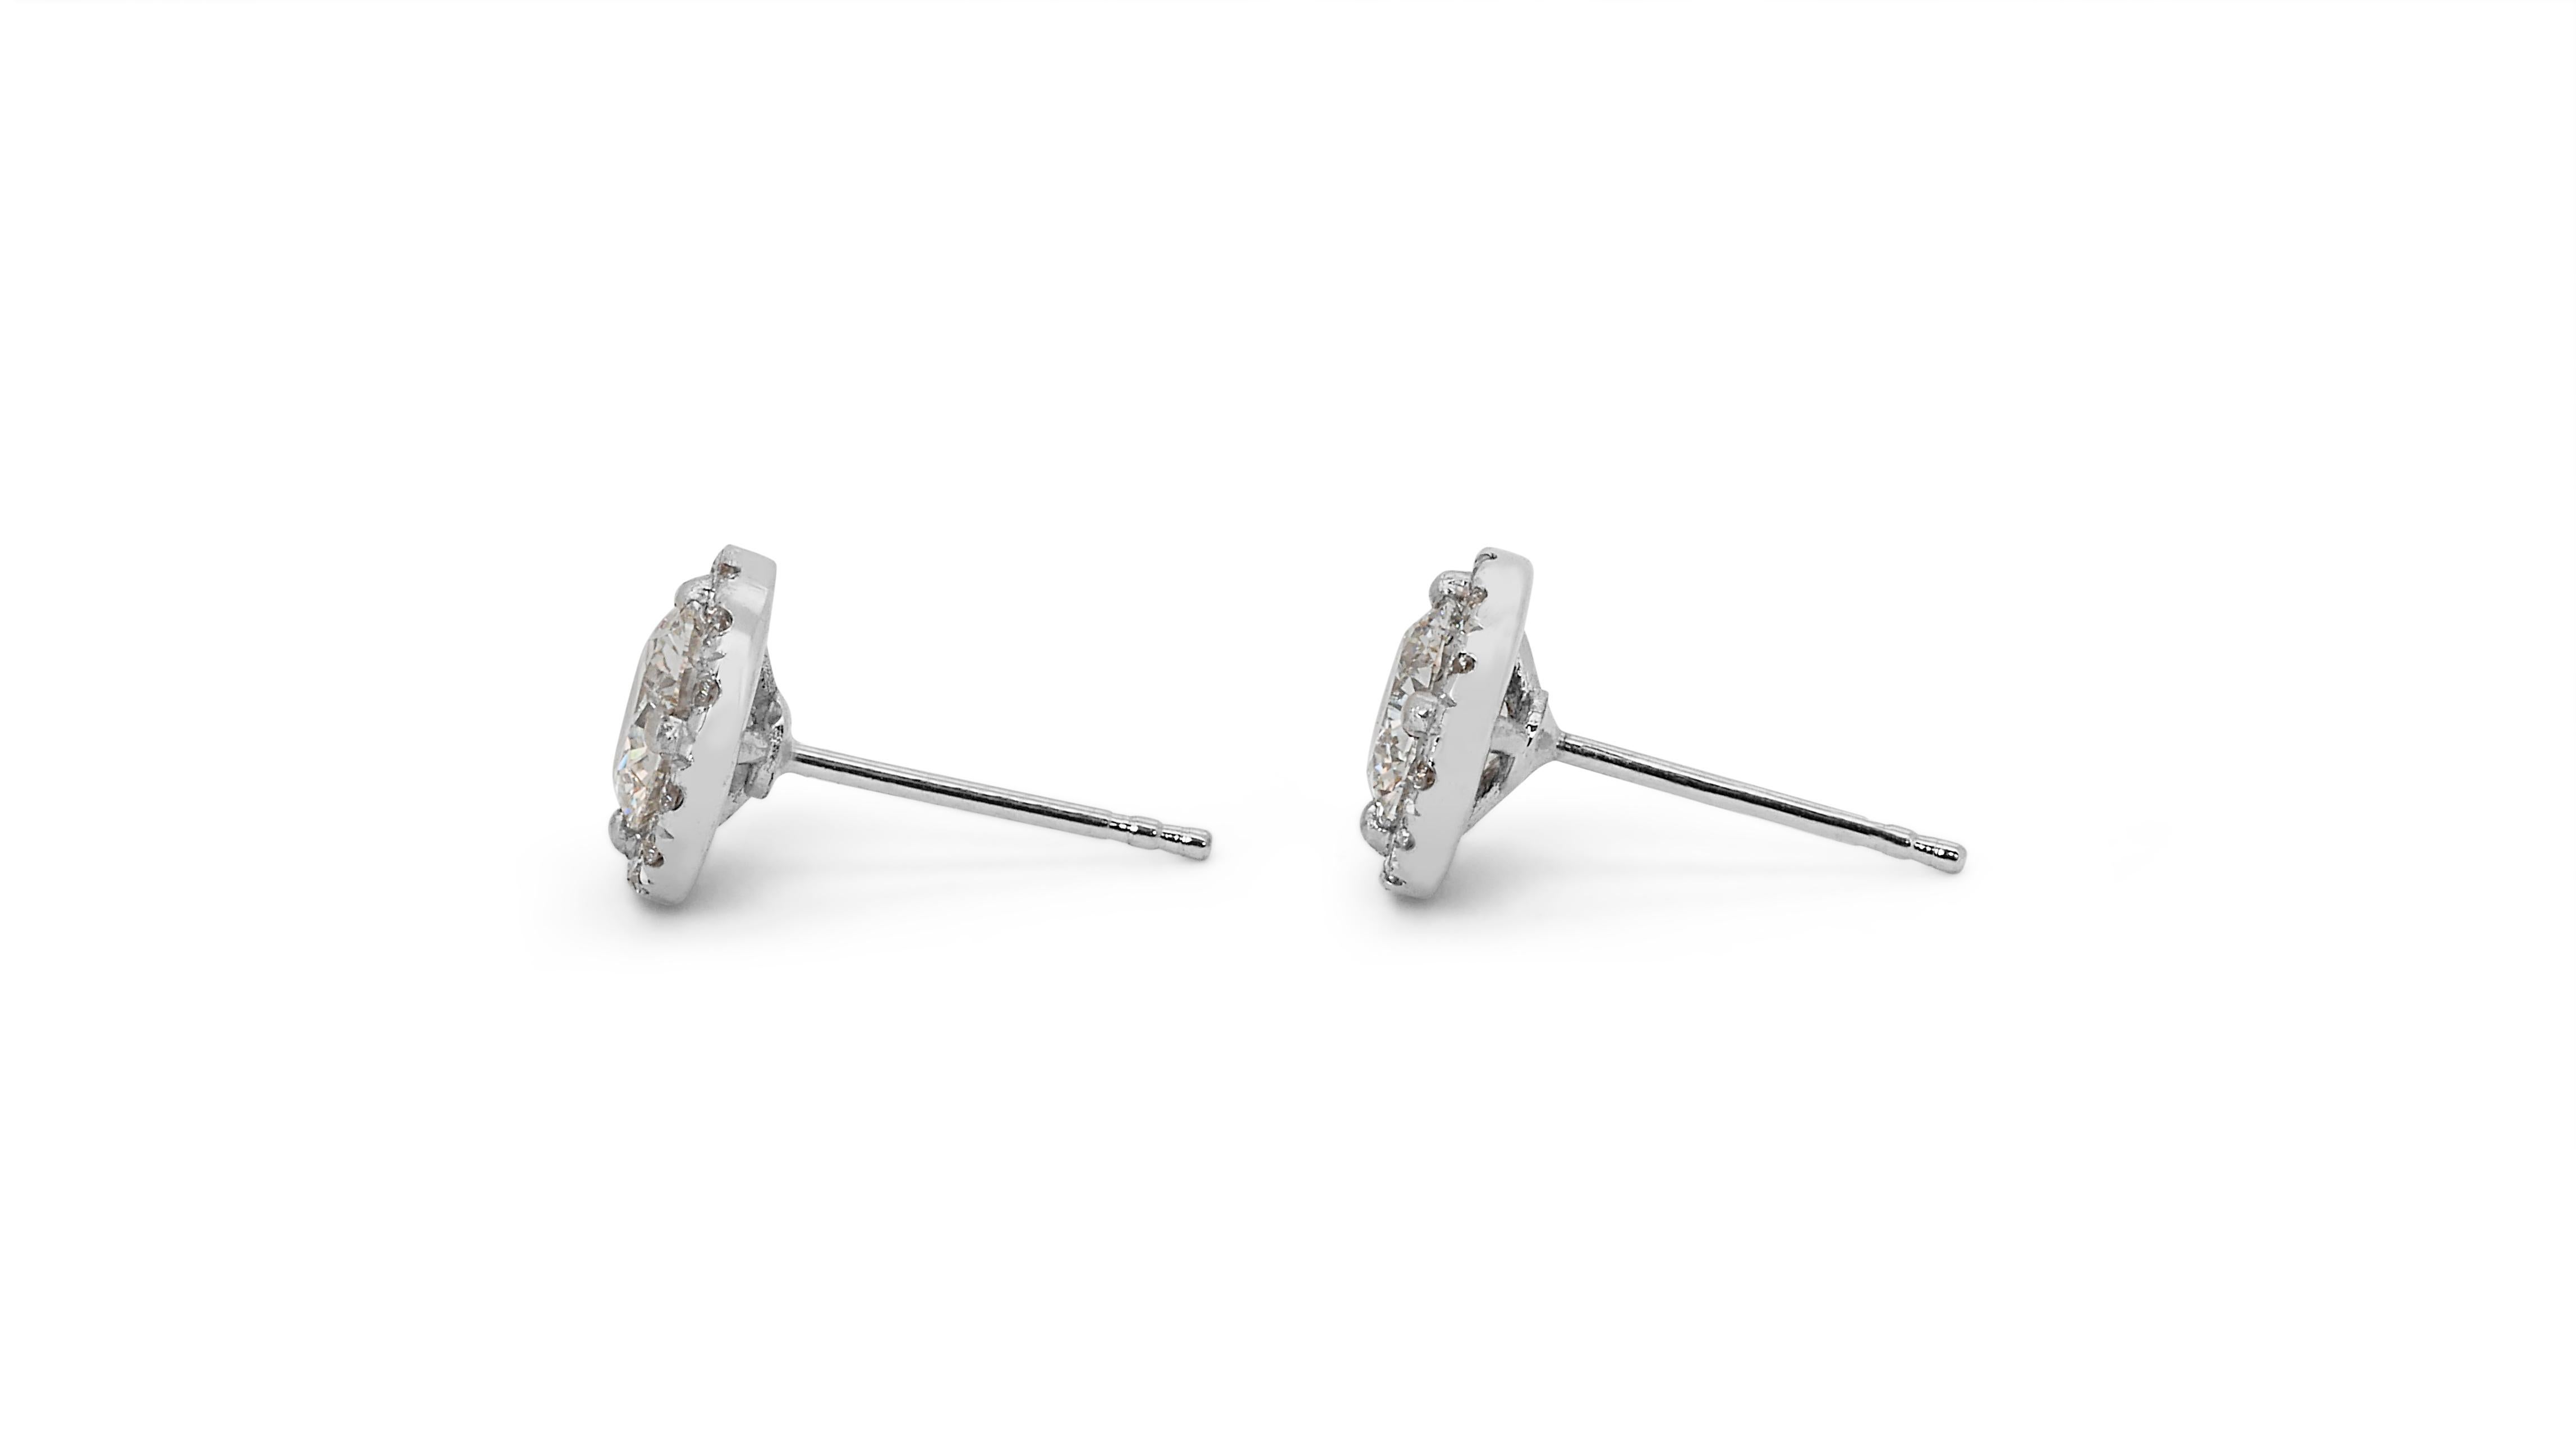 Fascinating 2.55ct Diamond Halo Earrings in 18k White Gold - GIA Certified For Sale 1